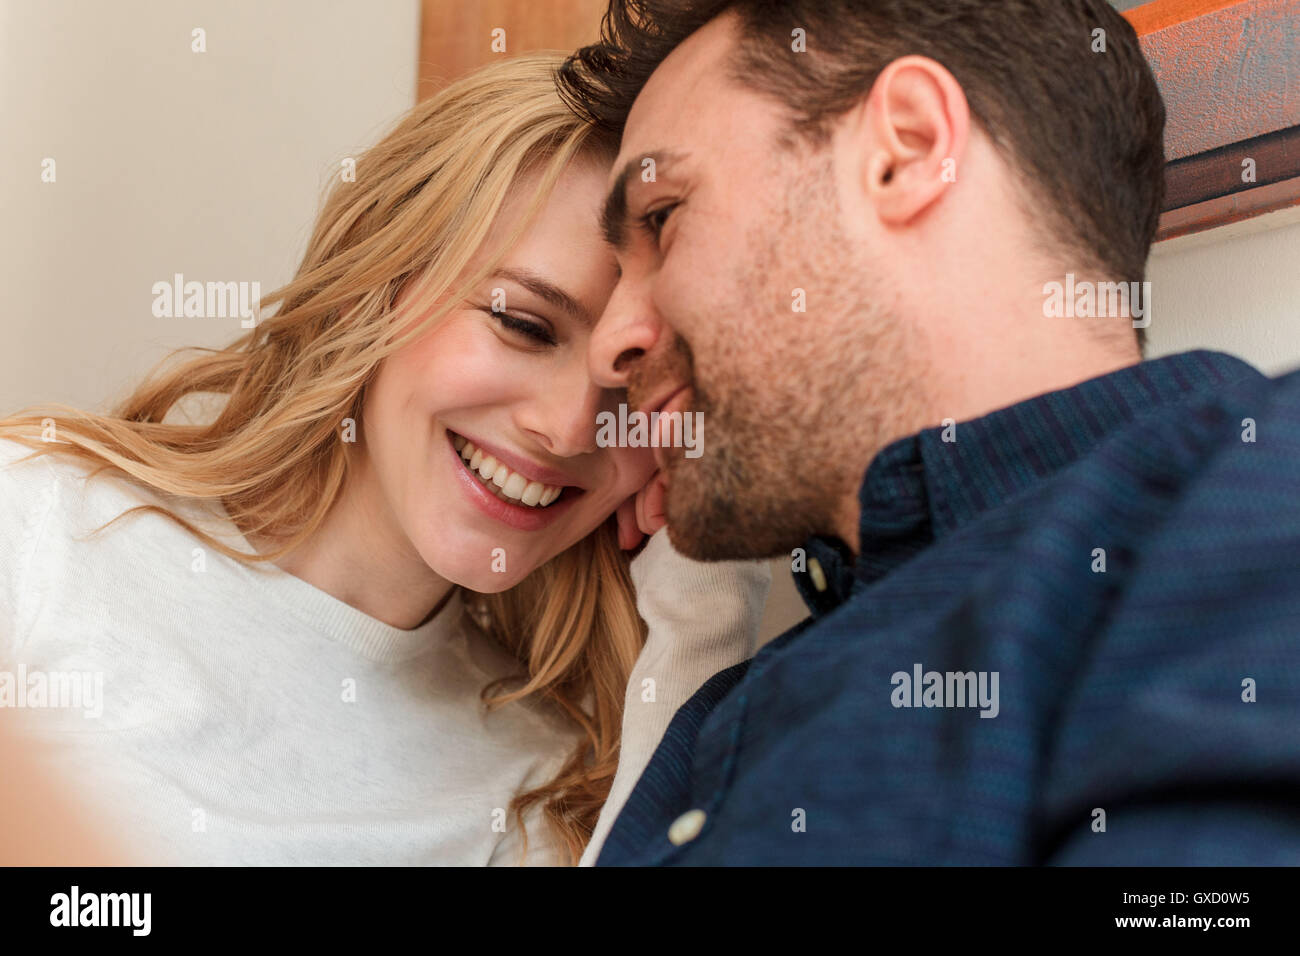 Couple snuggling together smiling Stock Photo